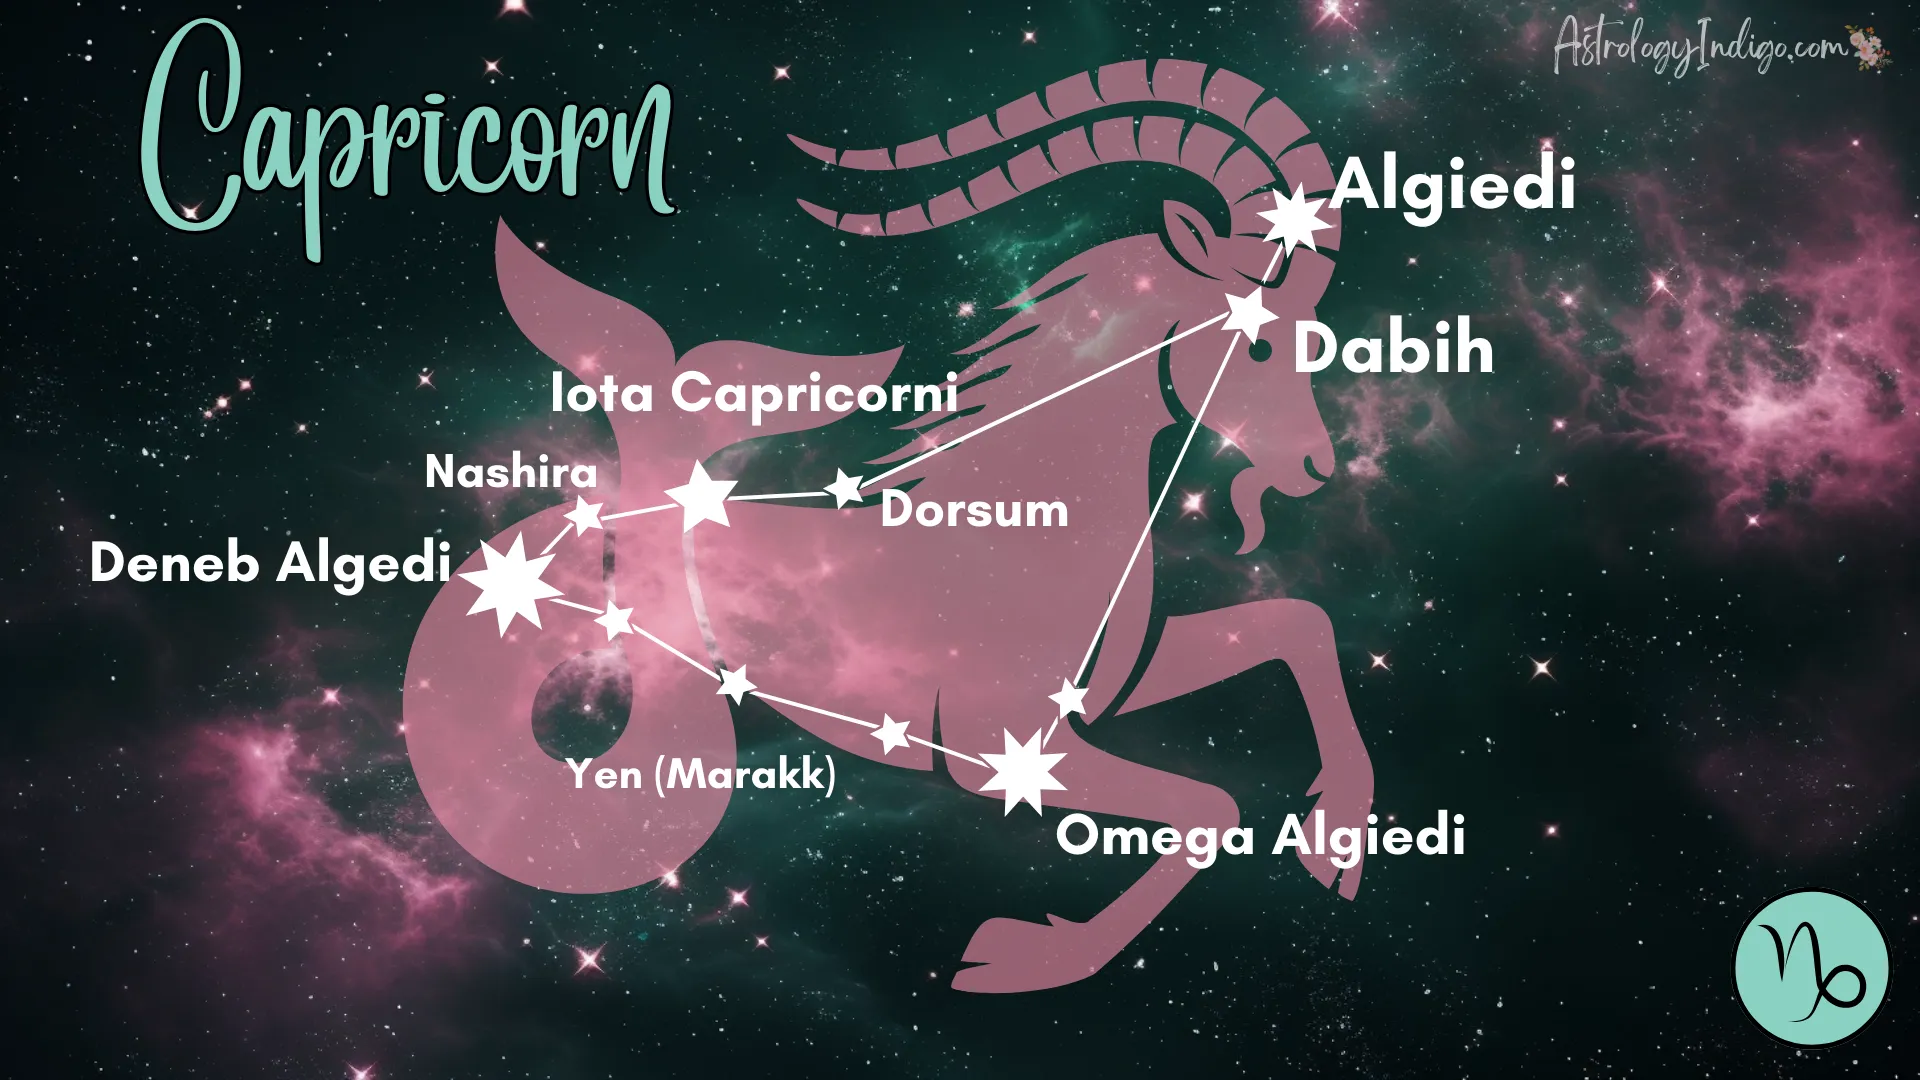 The Capricorn constellation with information about the stars and a pink image of a Sea Goat behind it.